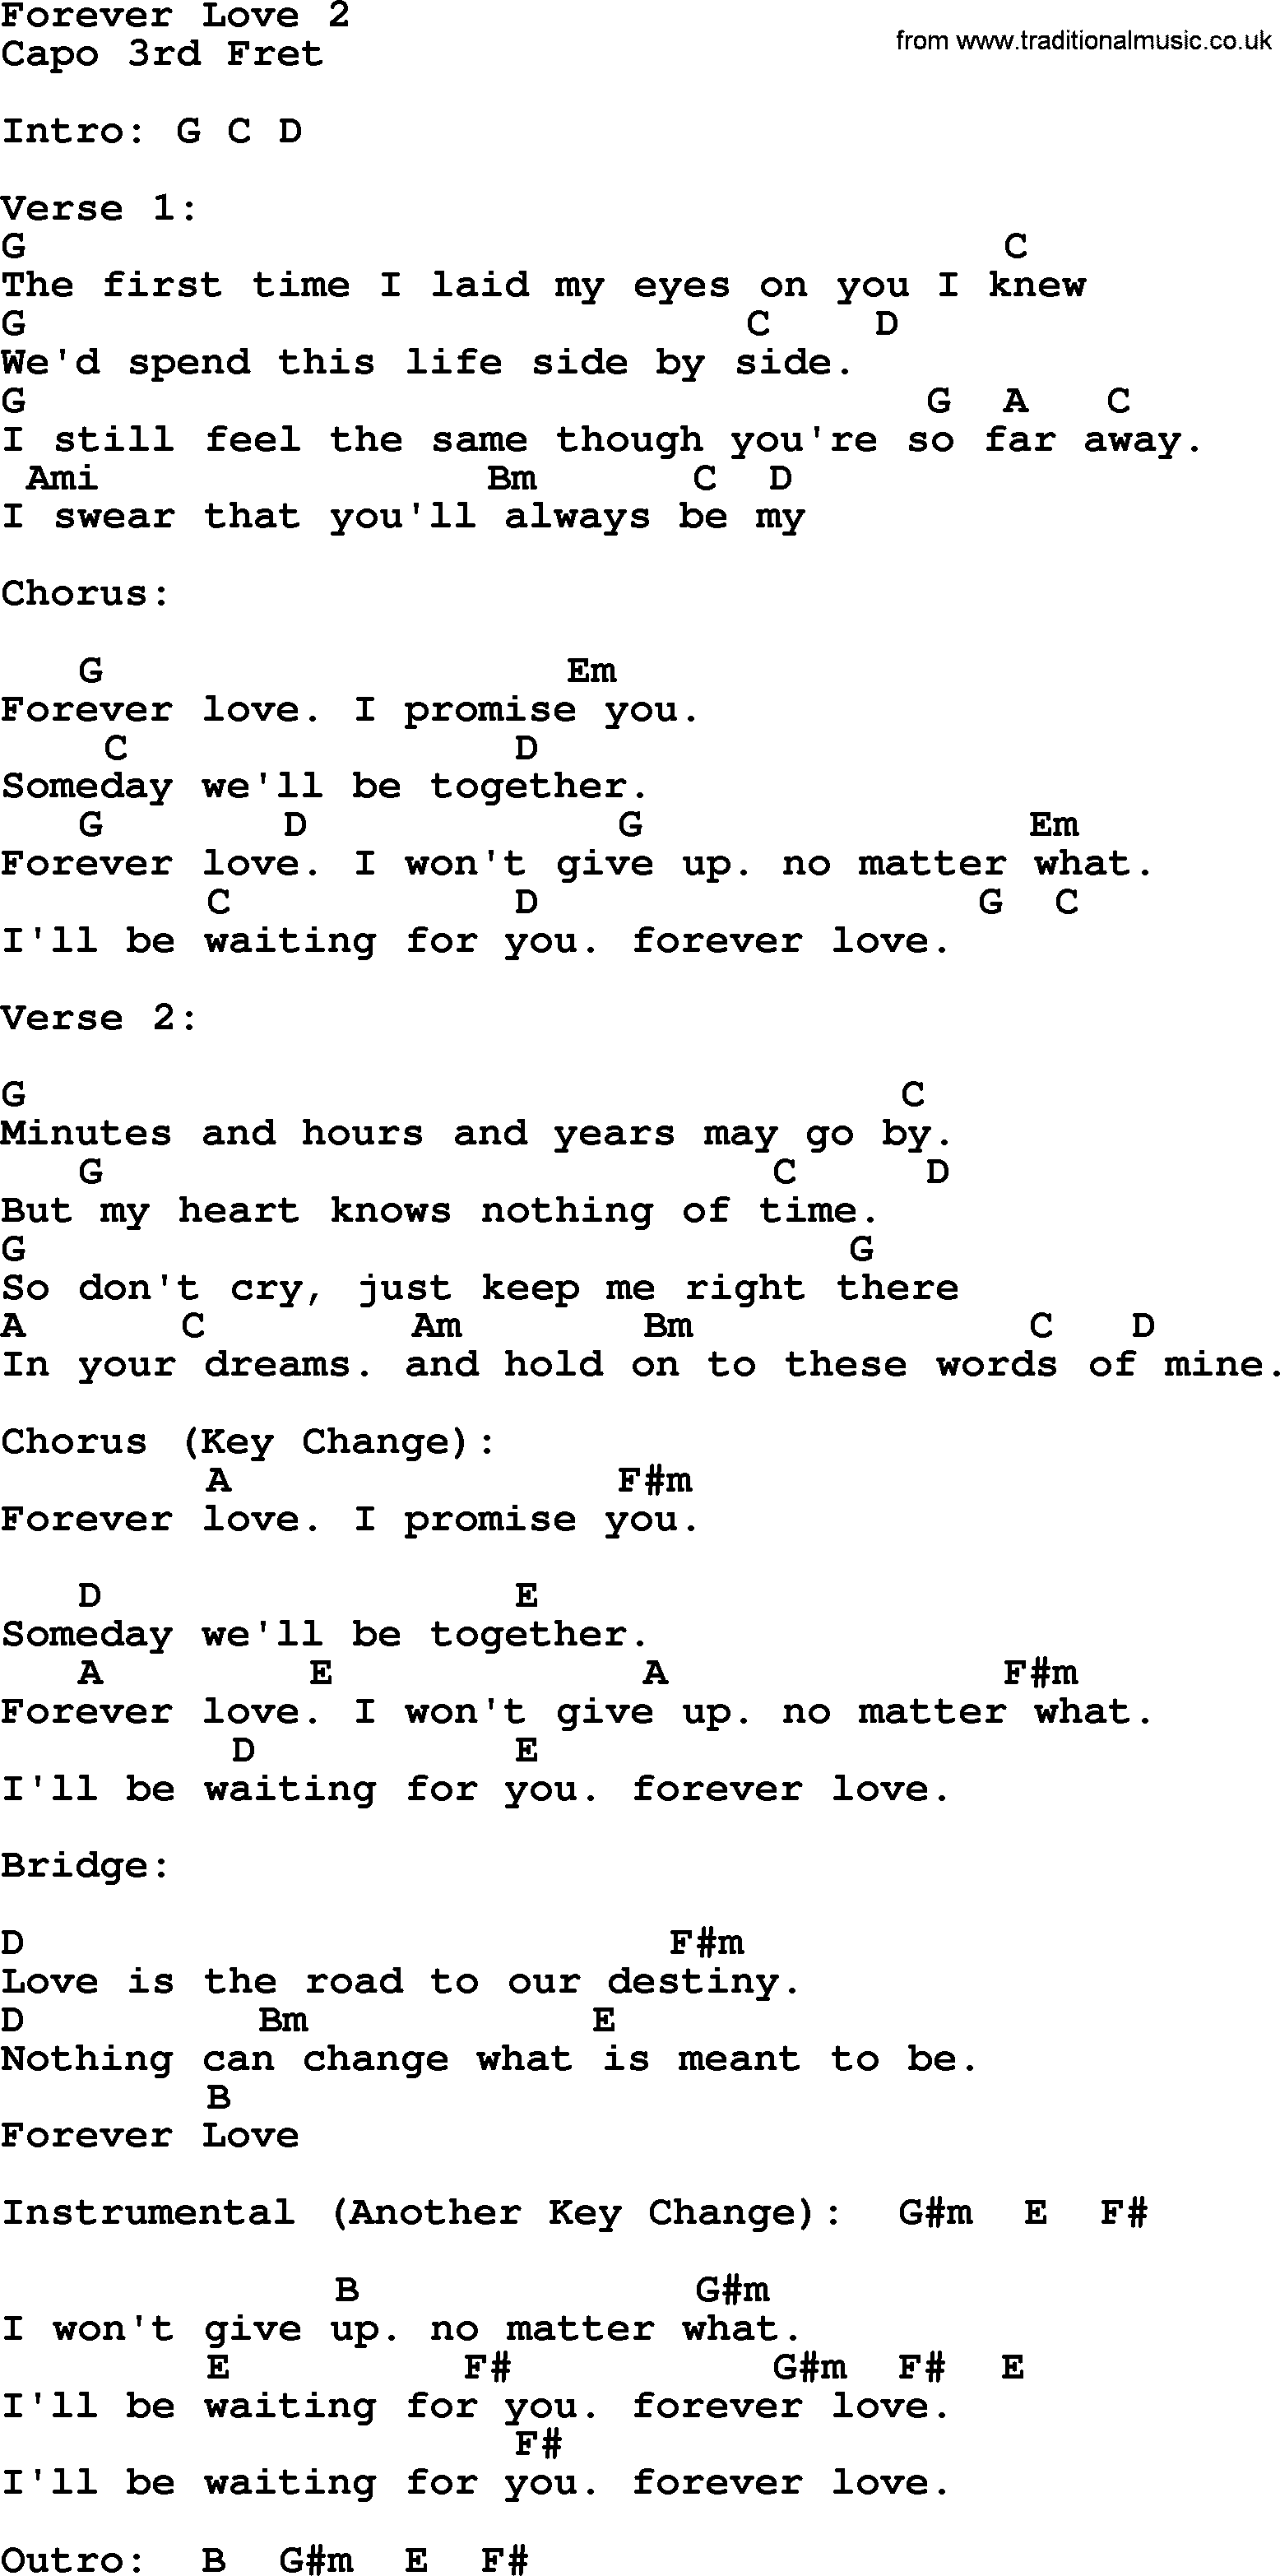 Reba McEntire song: Forever Love 2, lyrics and chords